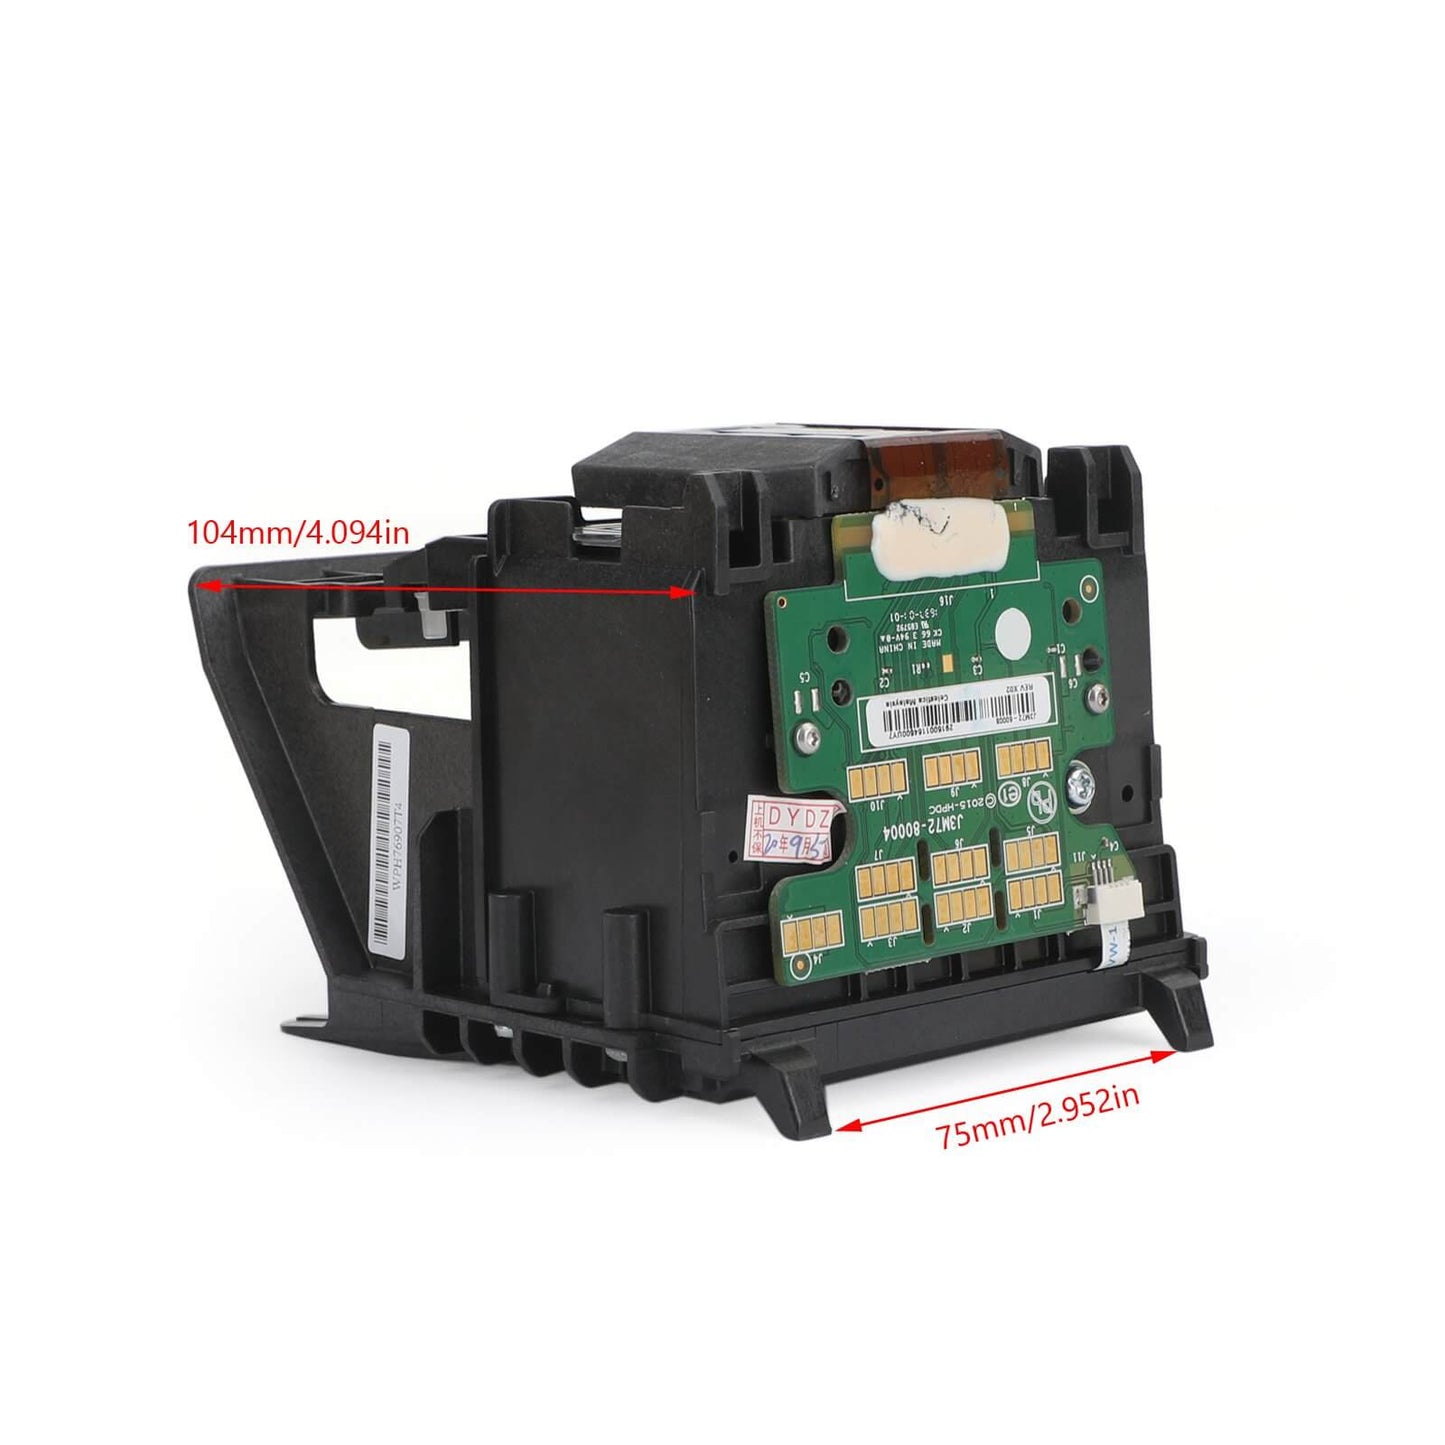 952 955 Printhead for HP Officejet Pro 8710 8216 7740 7720 8720 8730 8740 8210